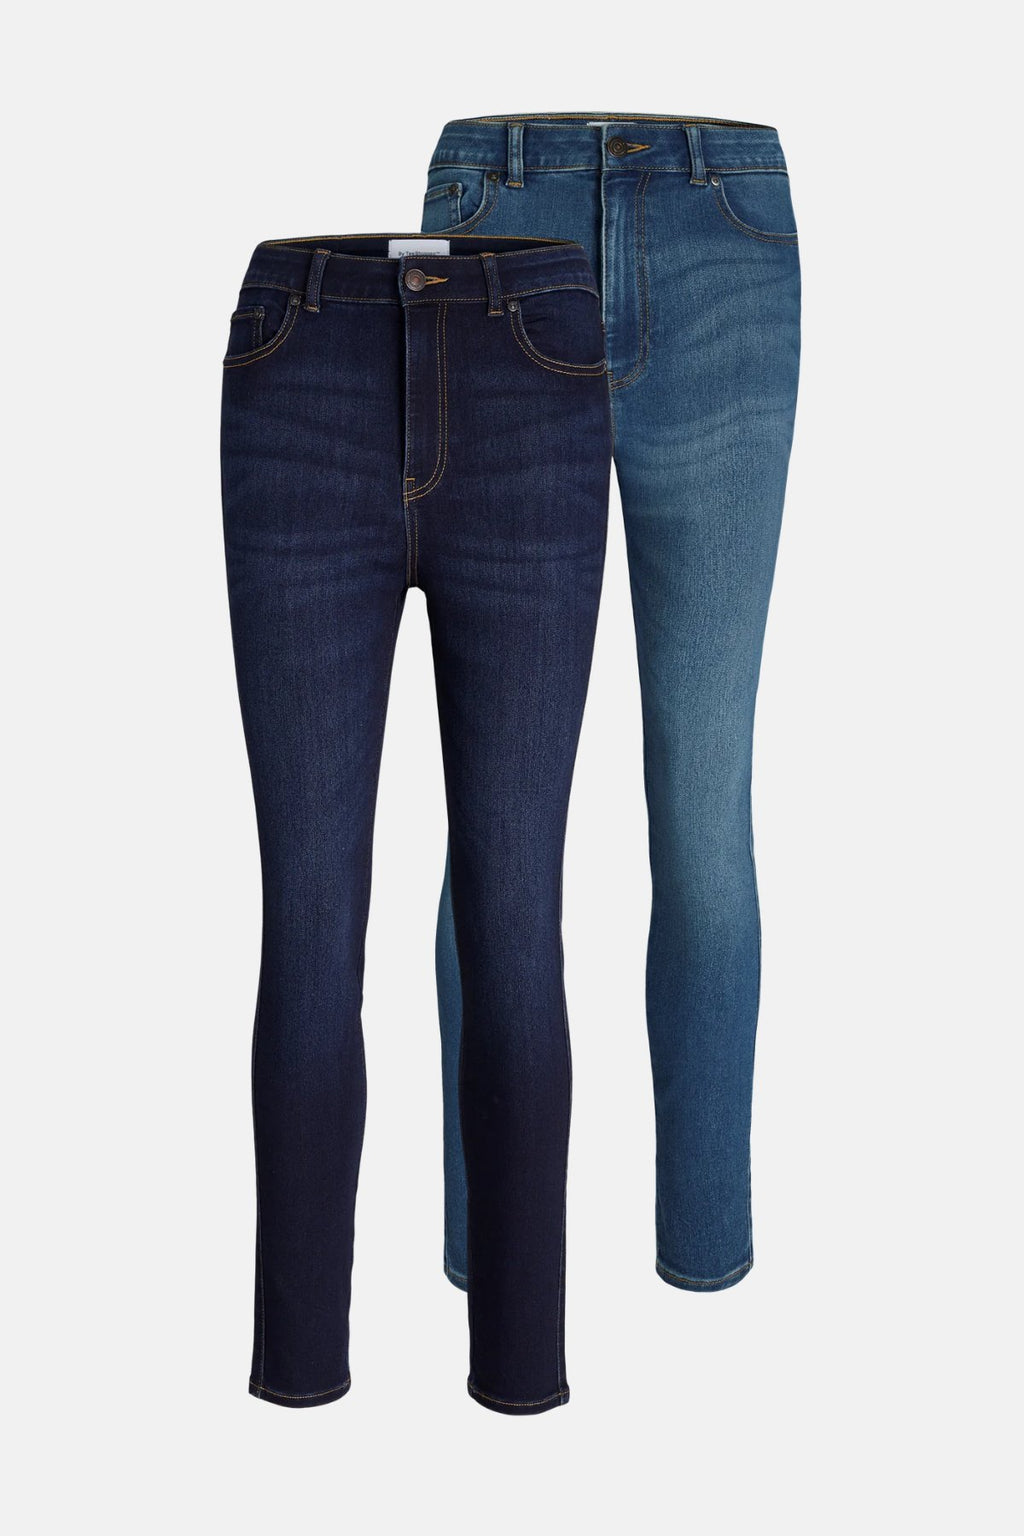 The Original Performance Skinny Jeans™️ Women - Package Deal (2 pcs.)